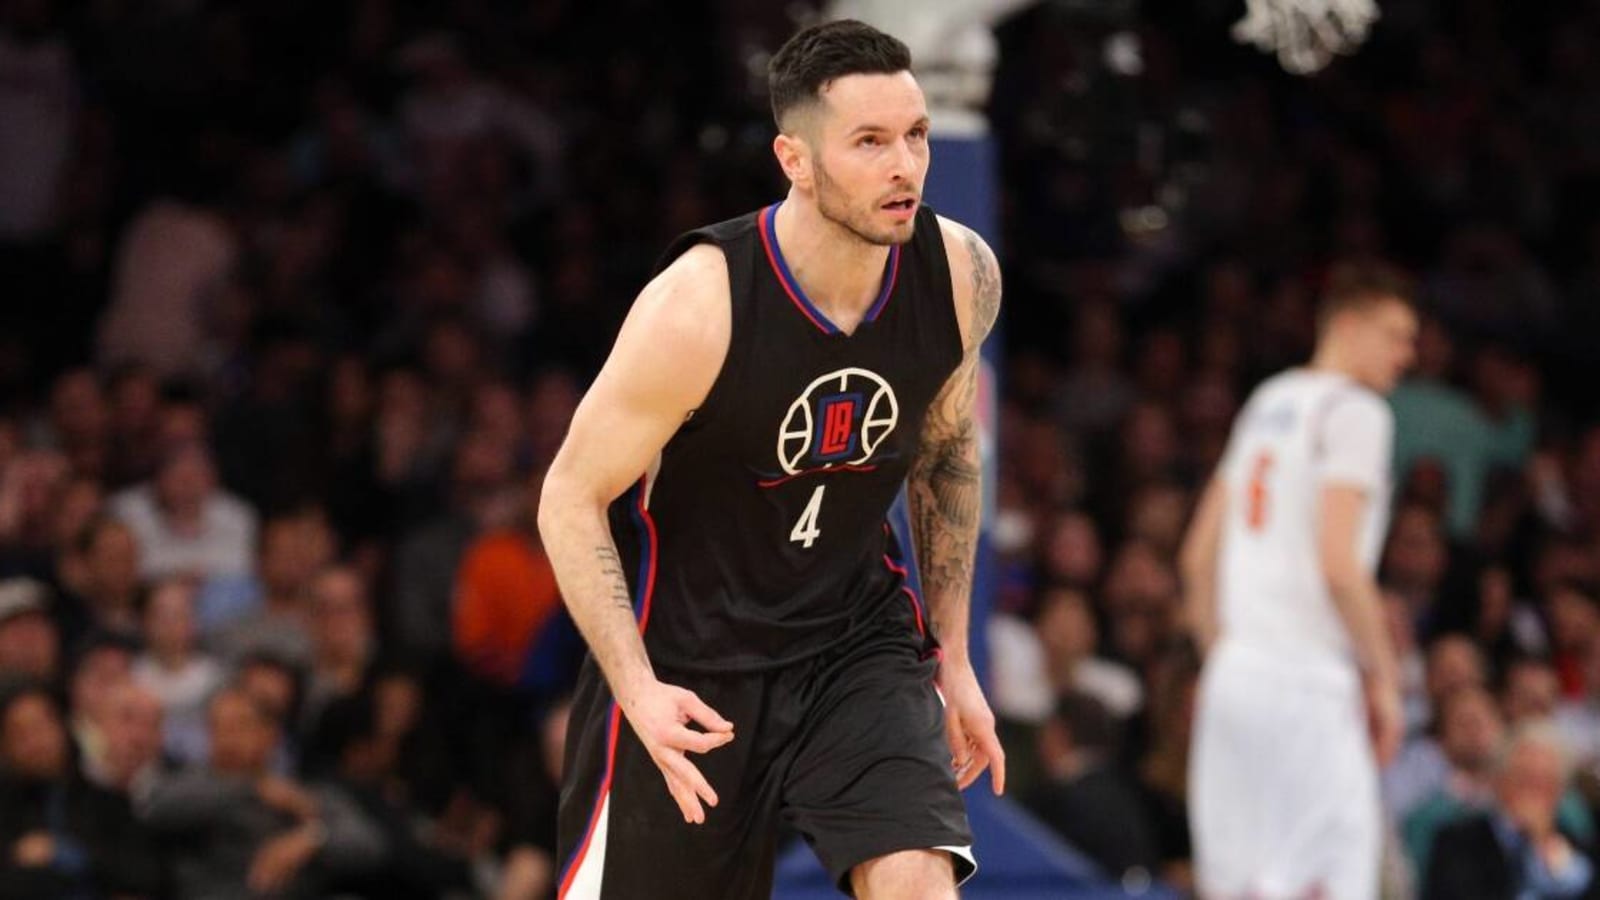 Report: Charlotte Hornets interviewing J.J. Redick for head coaching job